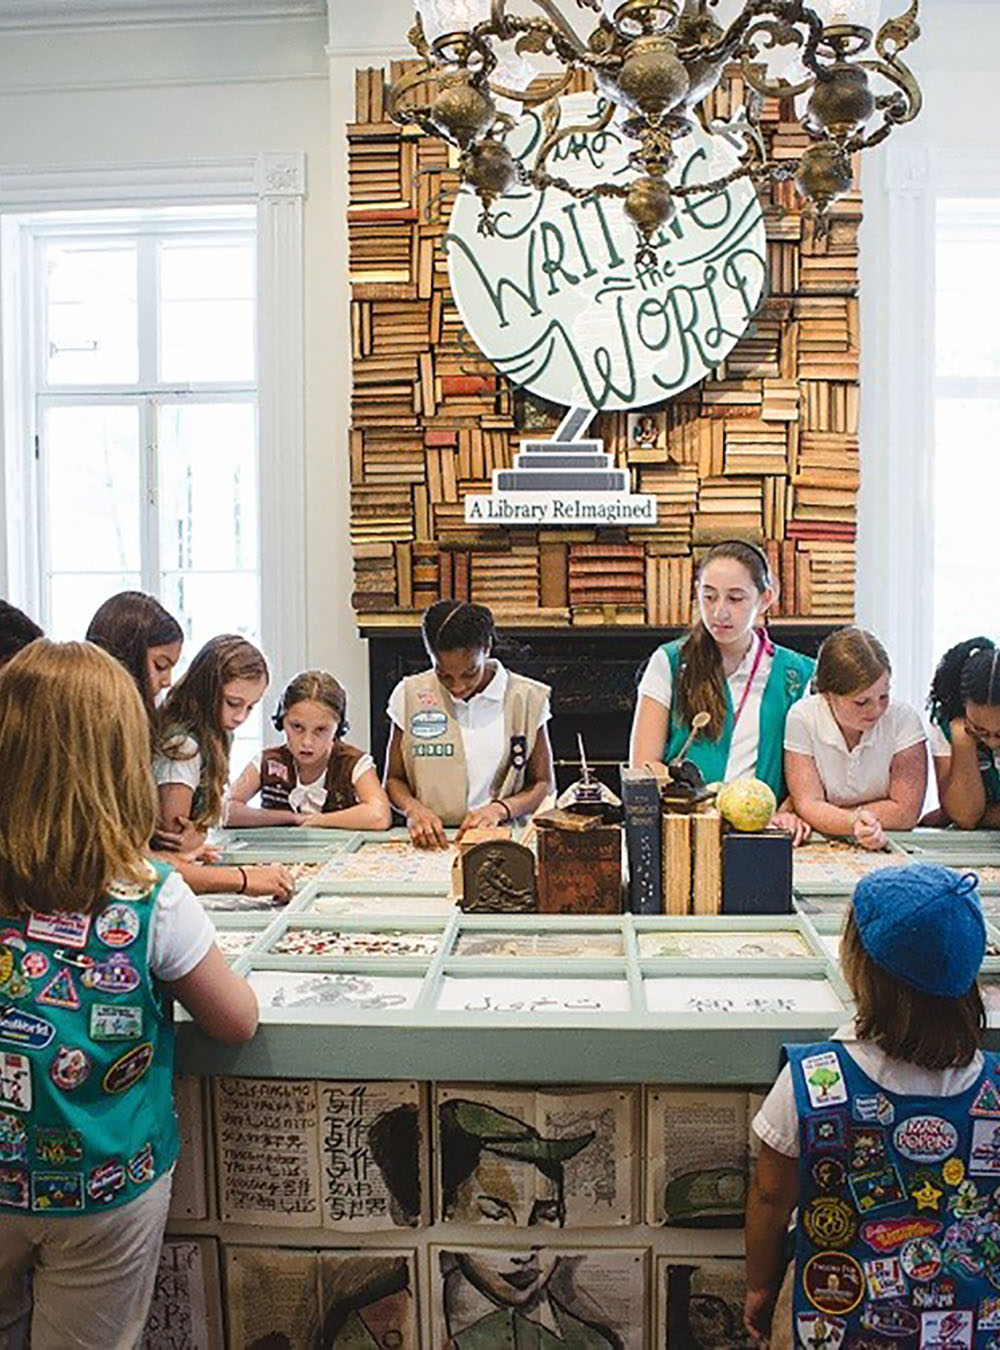 A group of Girl Scouts examine Girl Scout artifacts.